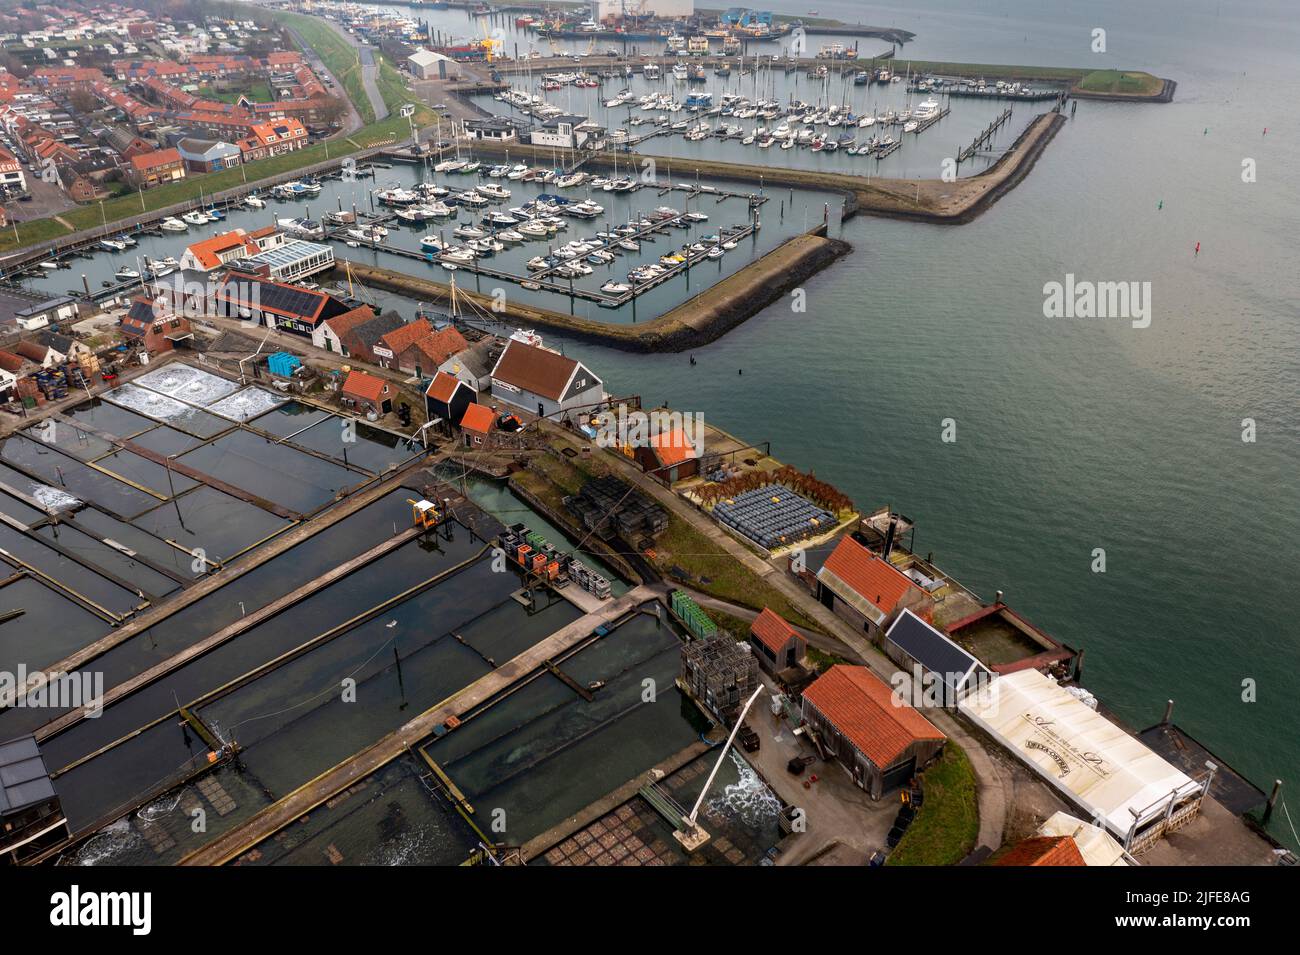 Aerial view of oyster farms with oyster pits in Yerseke, famous for its fishing industry along Oosterschelde (Eastern Scheldt), Zealand, Netherlands. Stock Photo